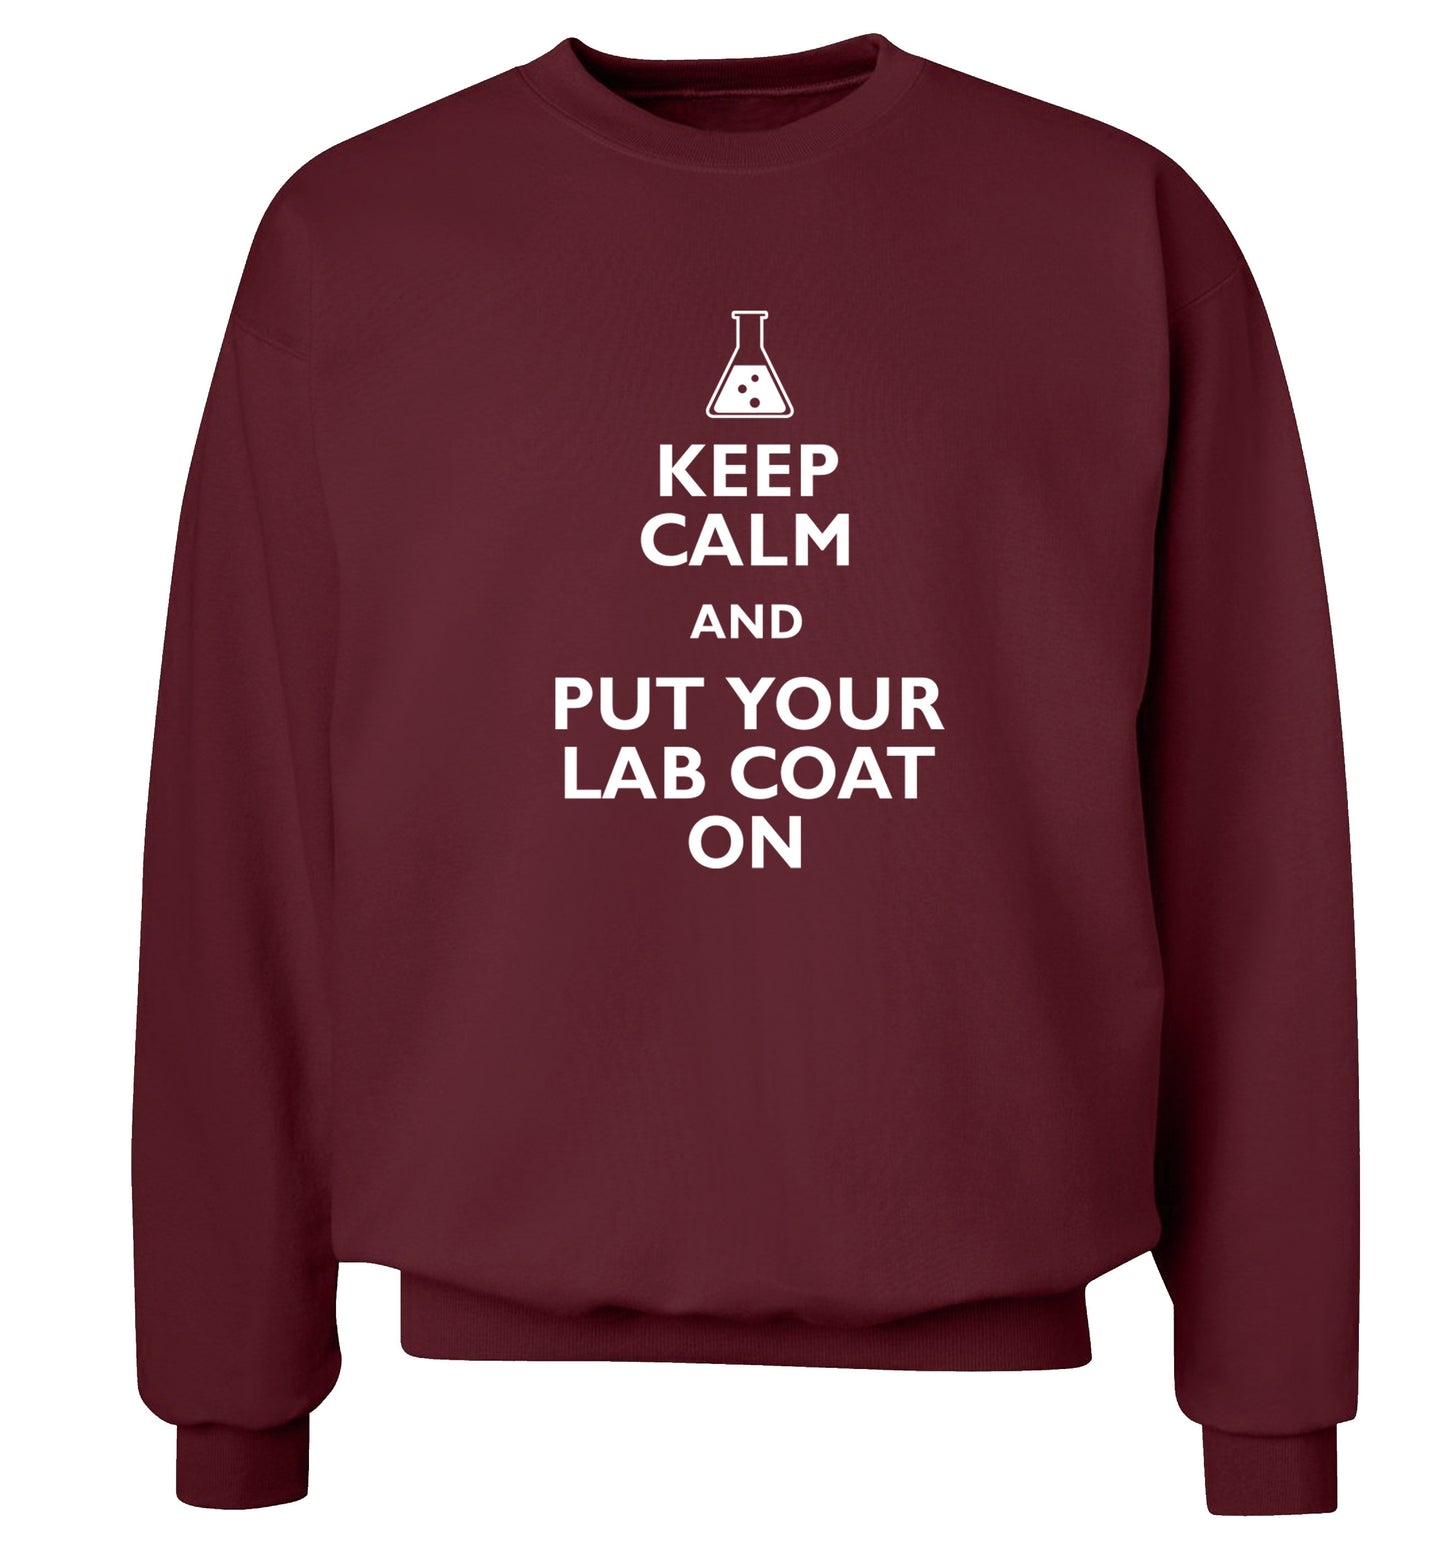 Keep calm and put your lab coat on Adult's unisex maroon Sweater 2XL